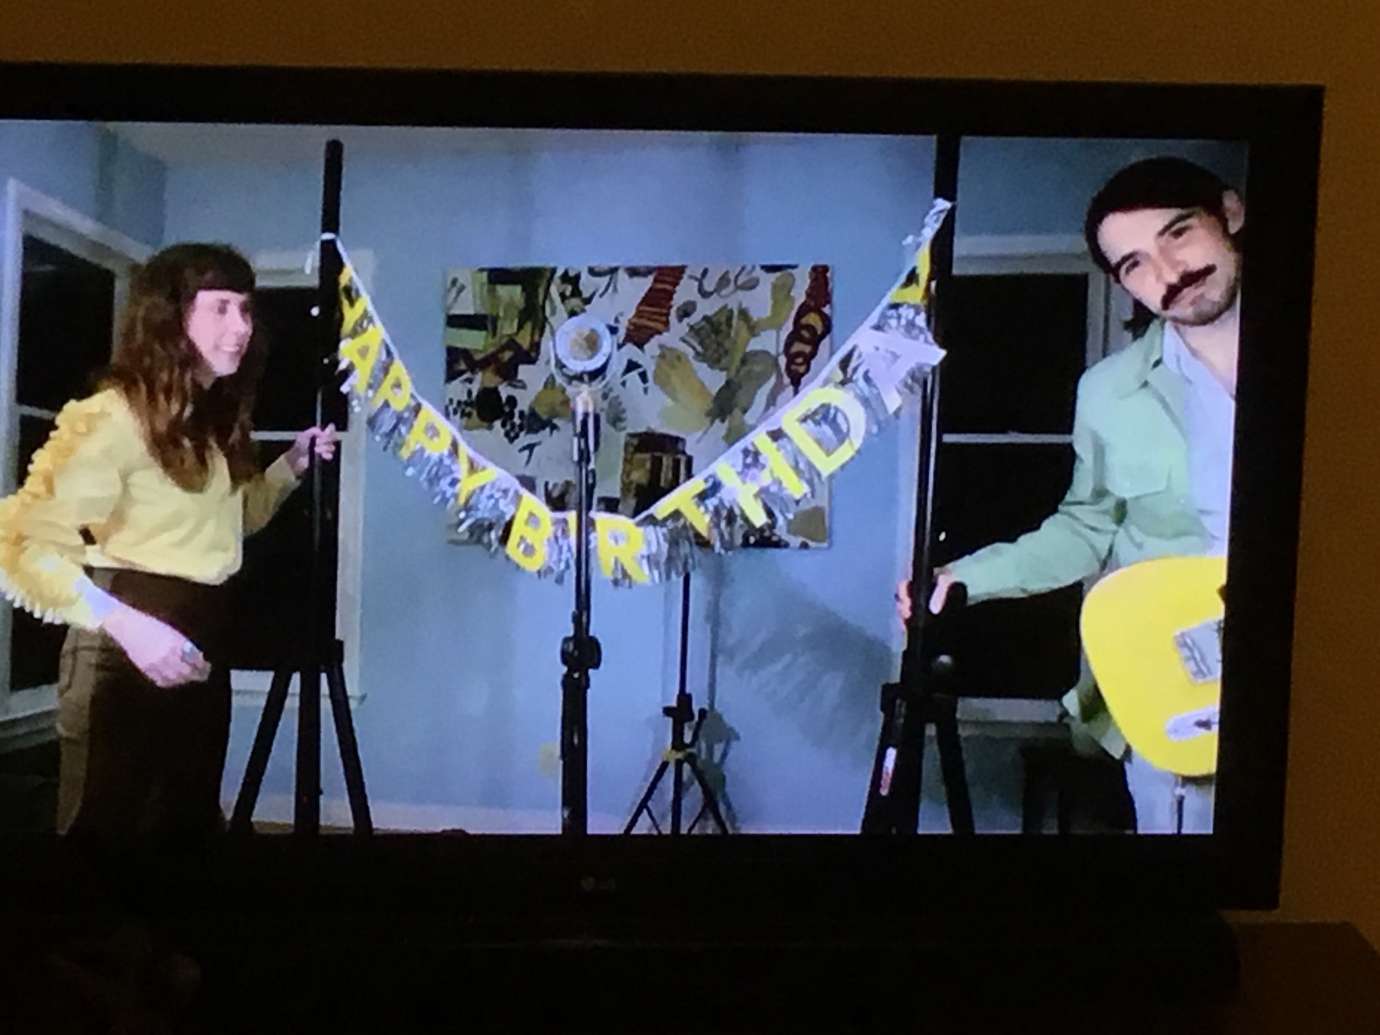 A still from a Blue Cactus live stream concert